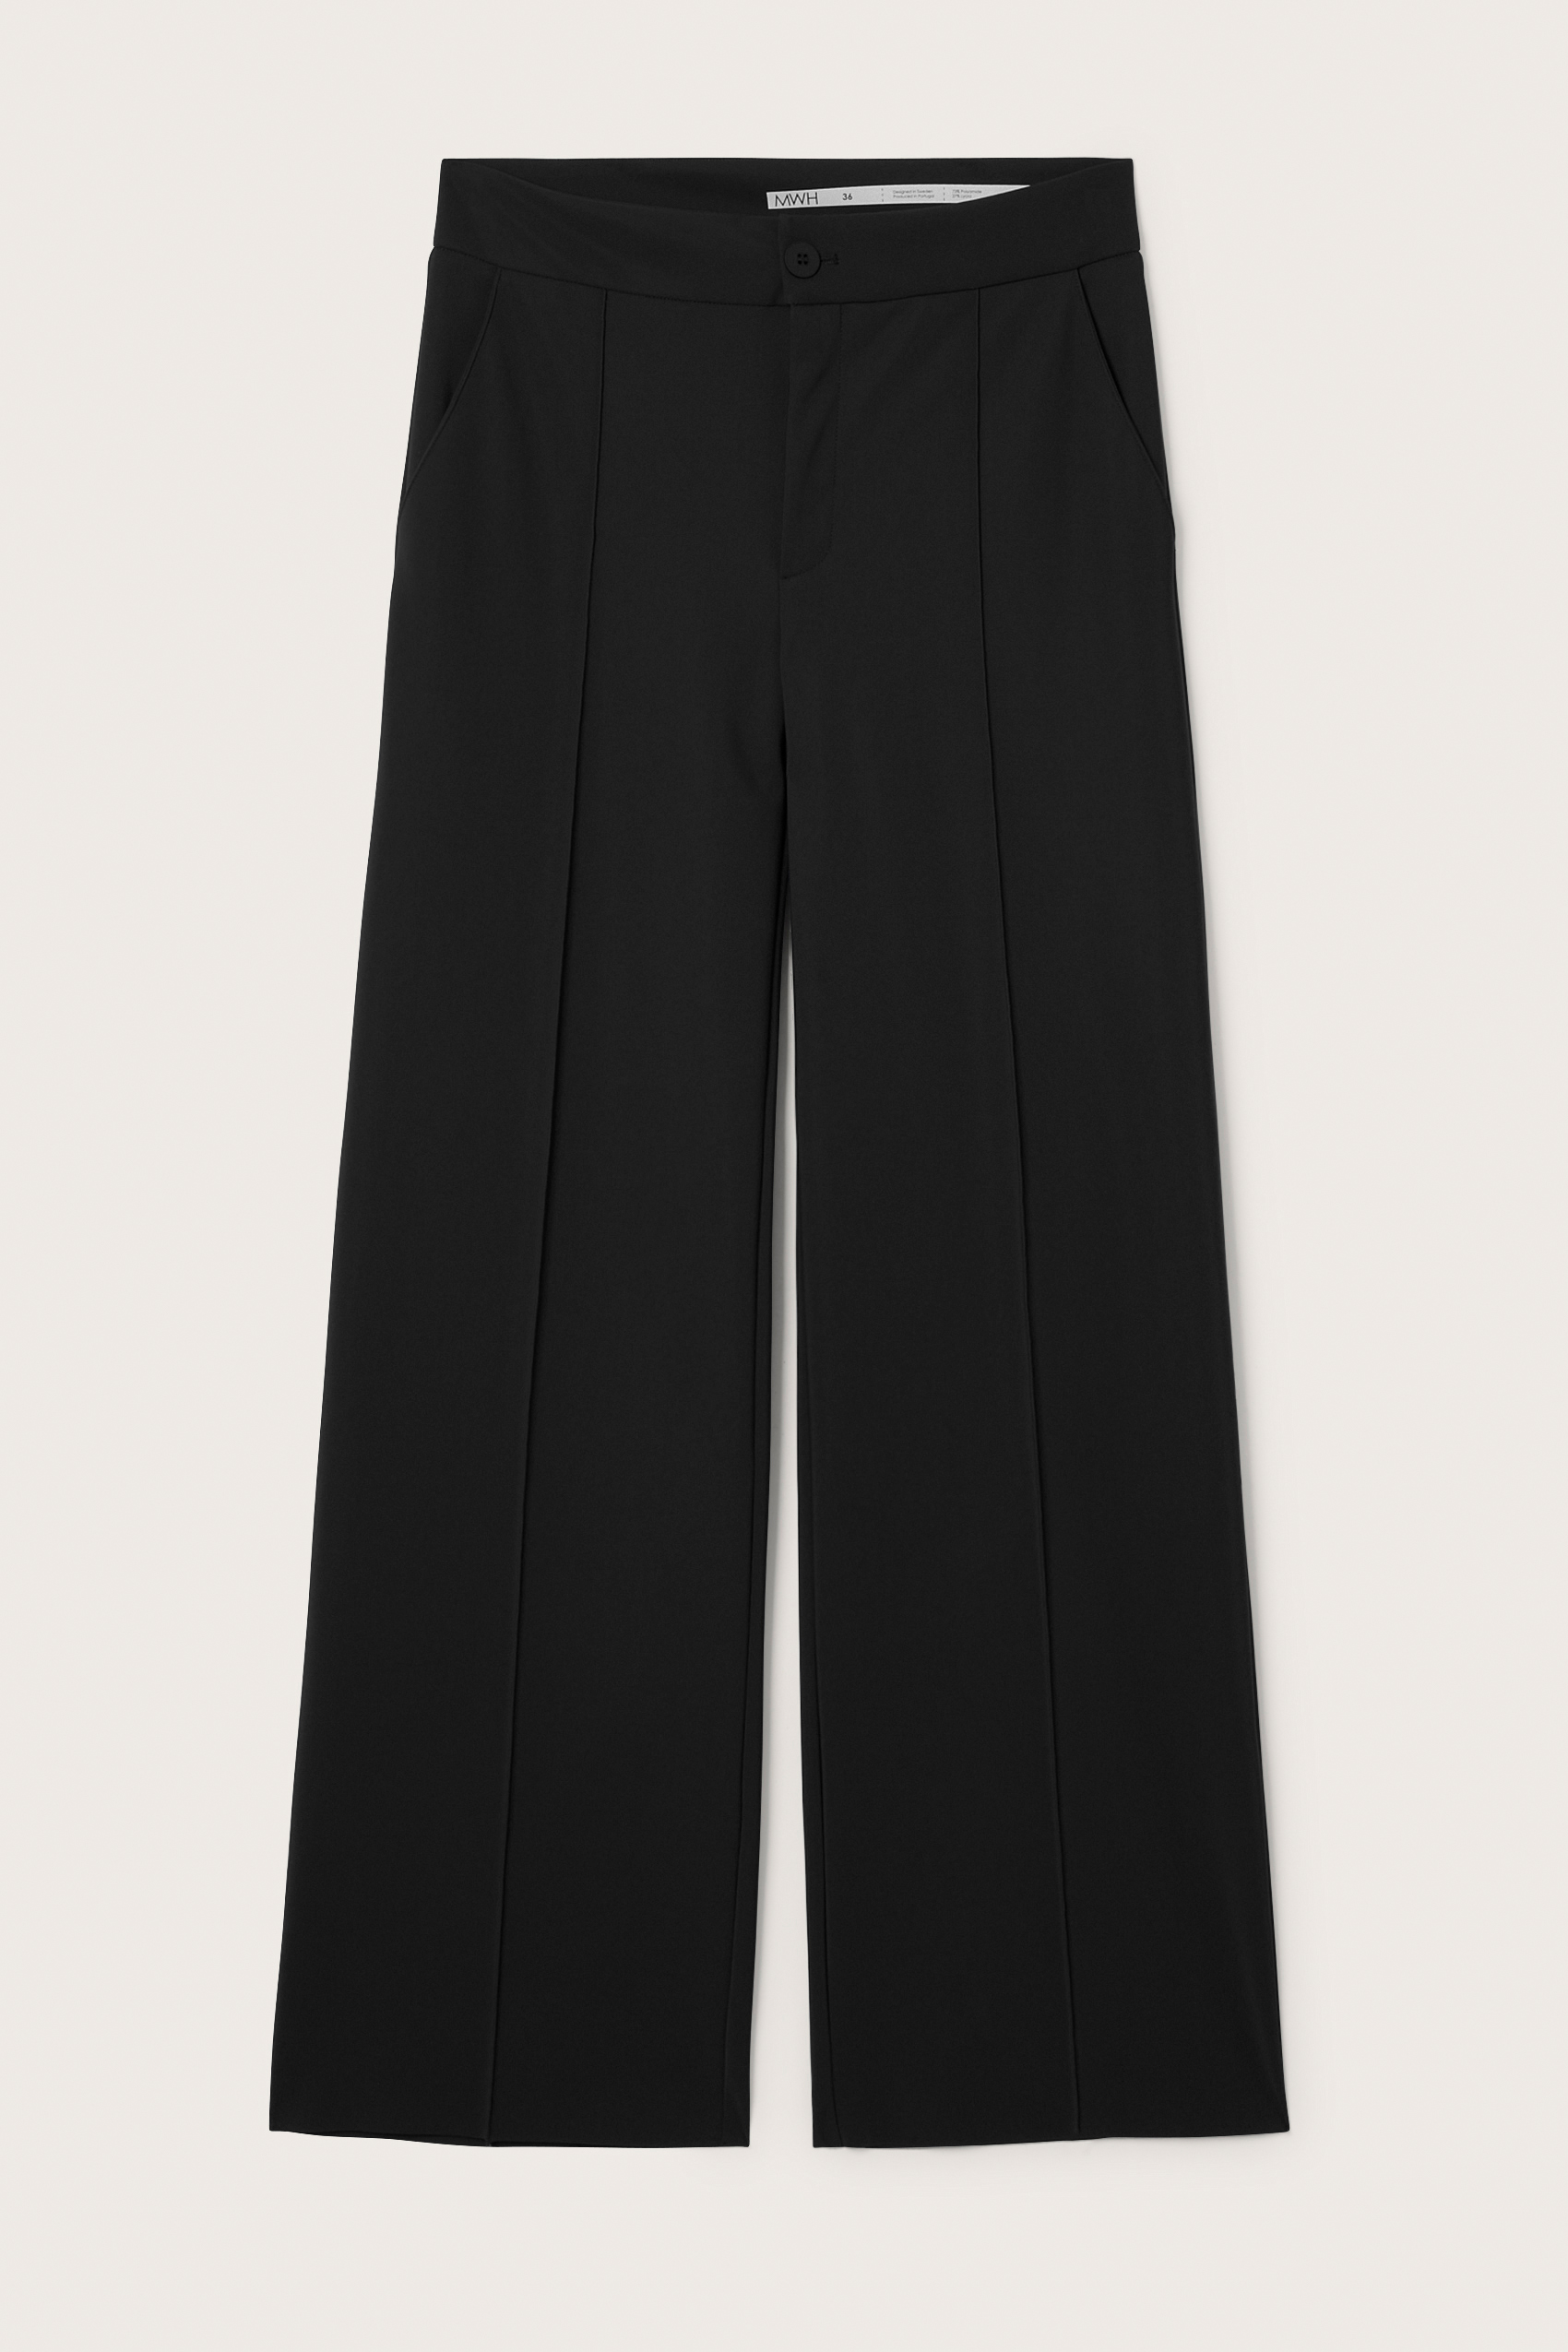 MWH of Sweden Rebel Trousers Black | MQ Marqet